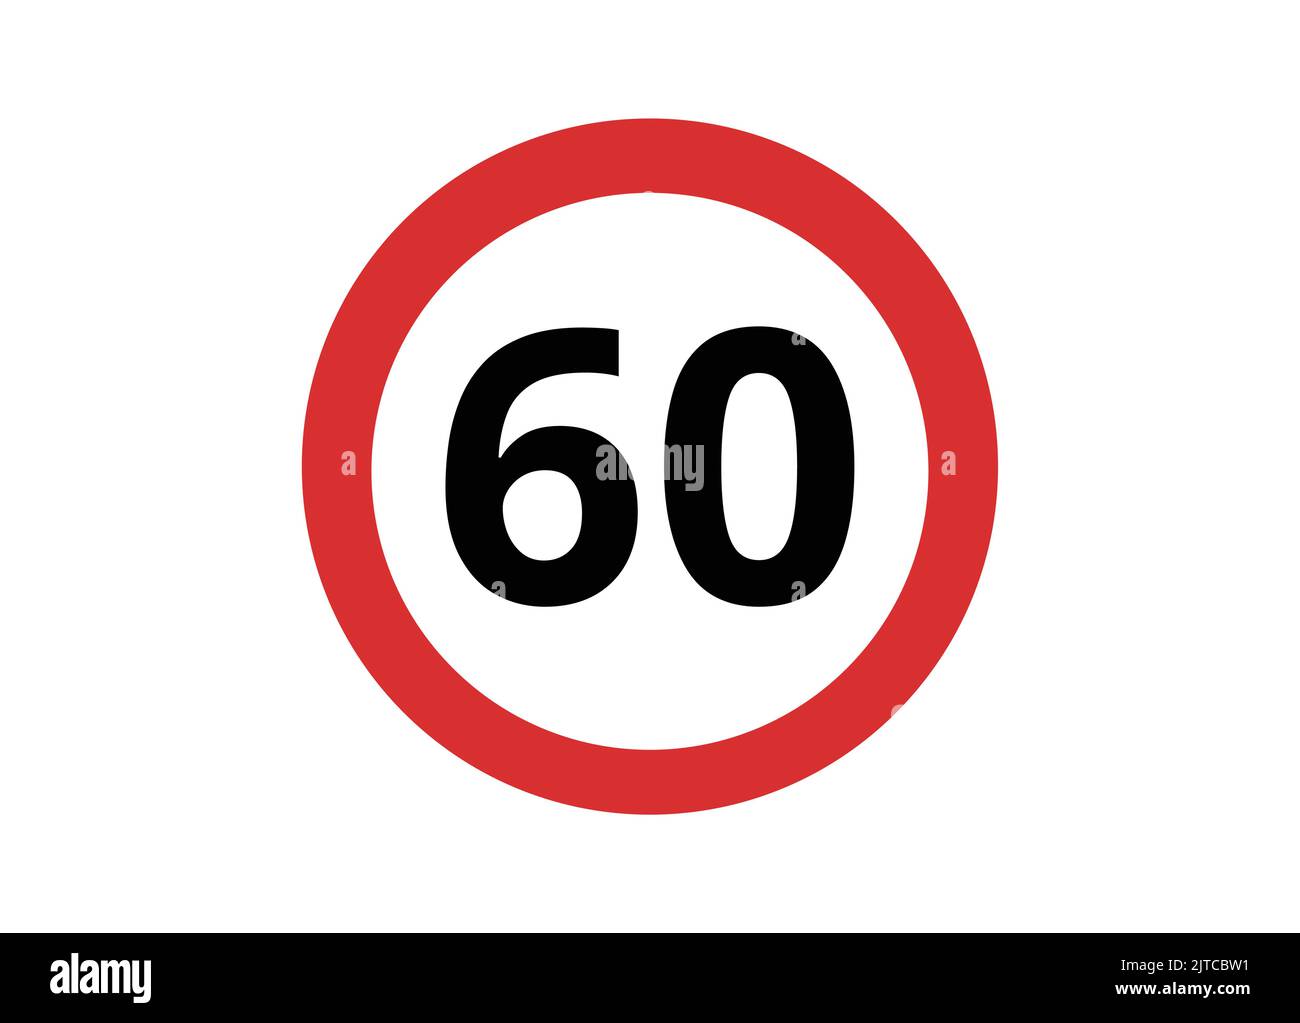 Speed limit 60 sign. Traffic signal vector. Stock Vector